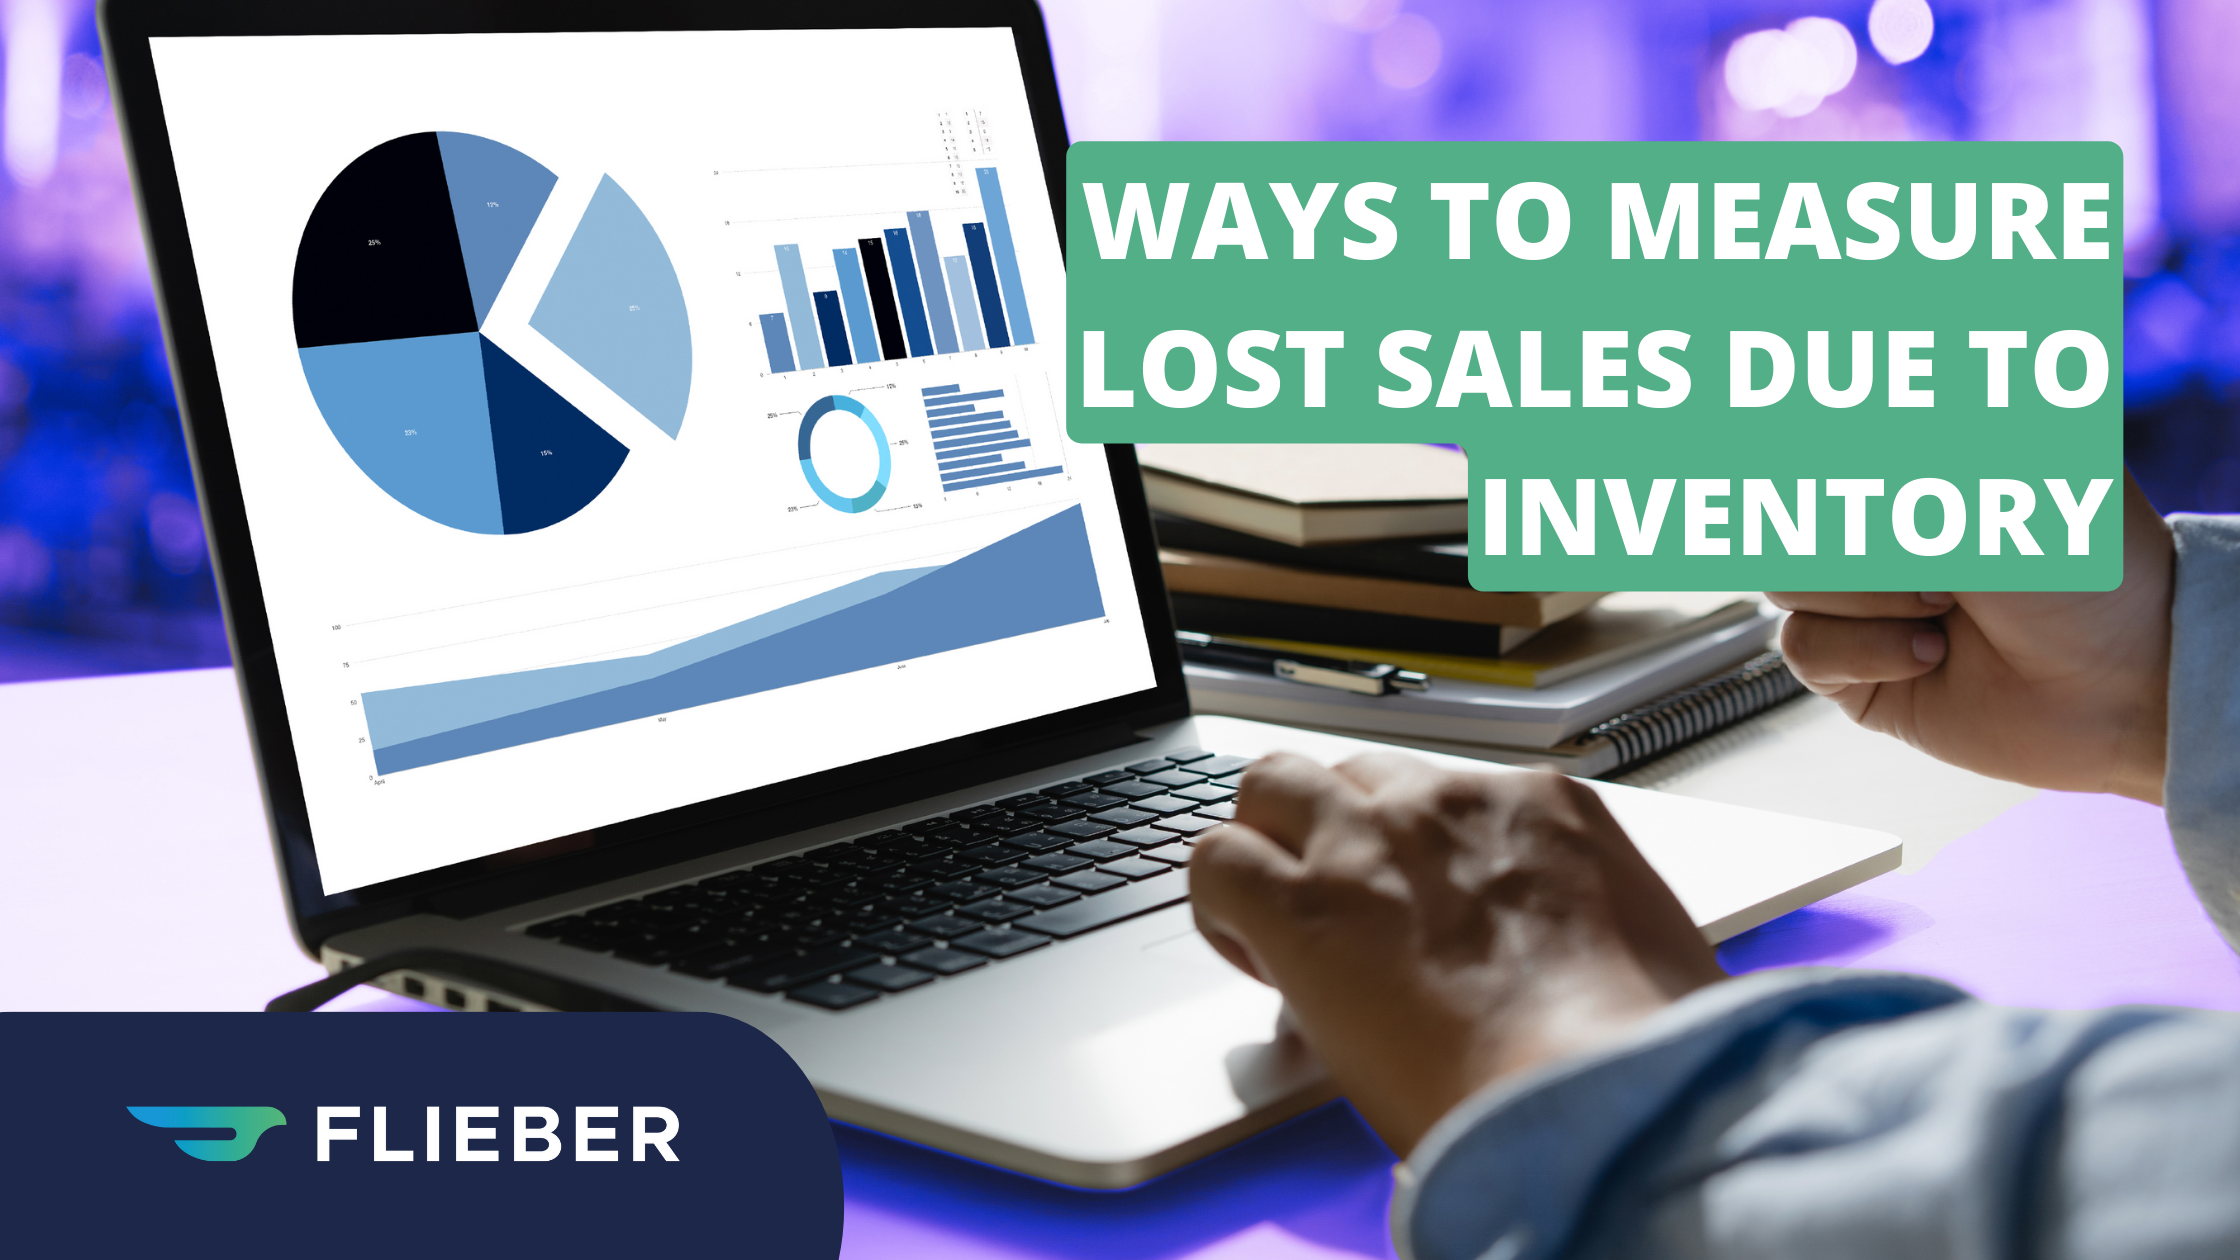 5 Ways to Measure Lost Sales Due to Inventory Constraints